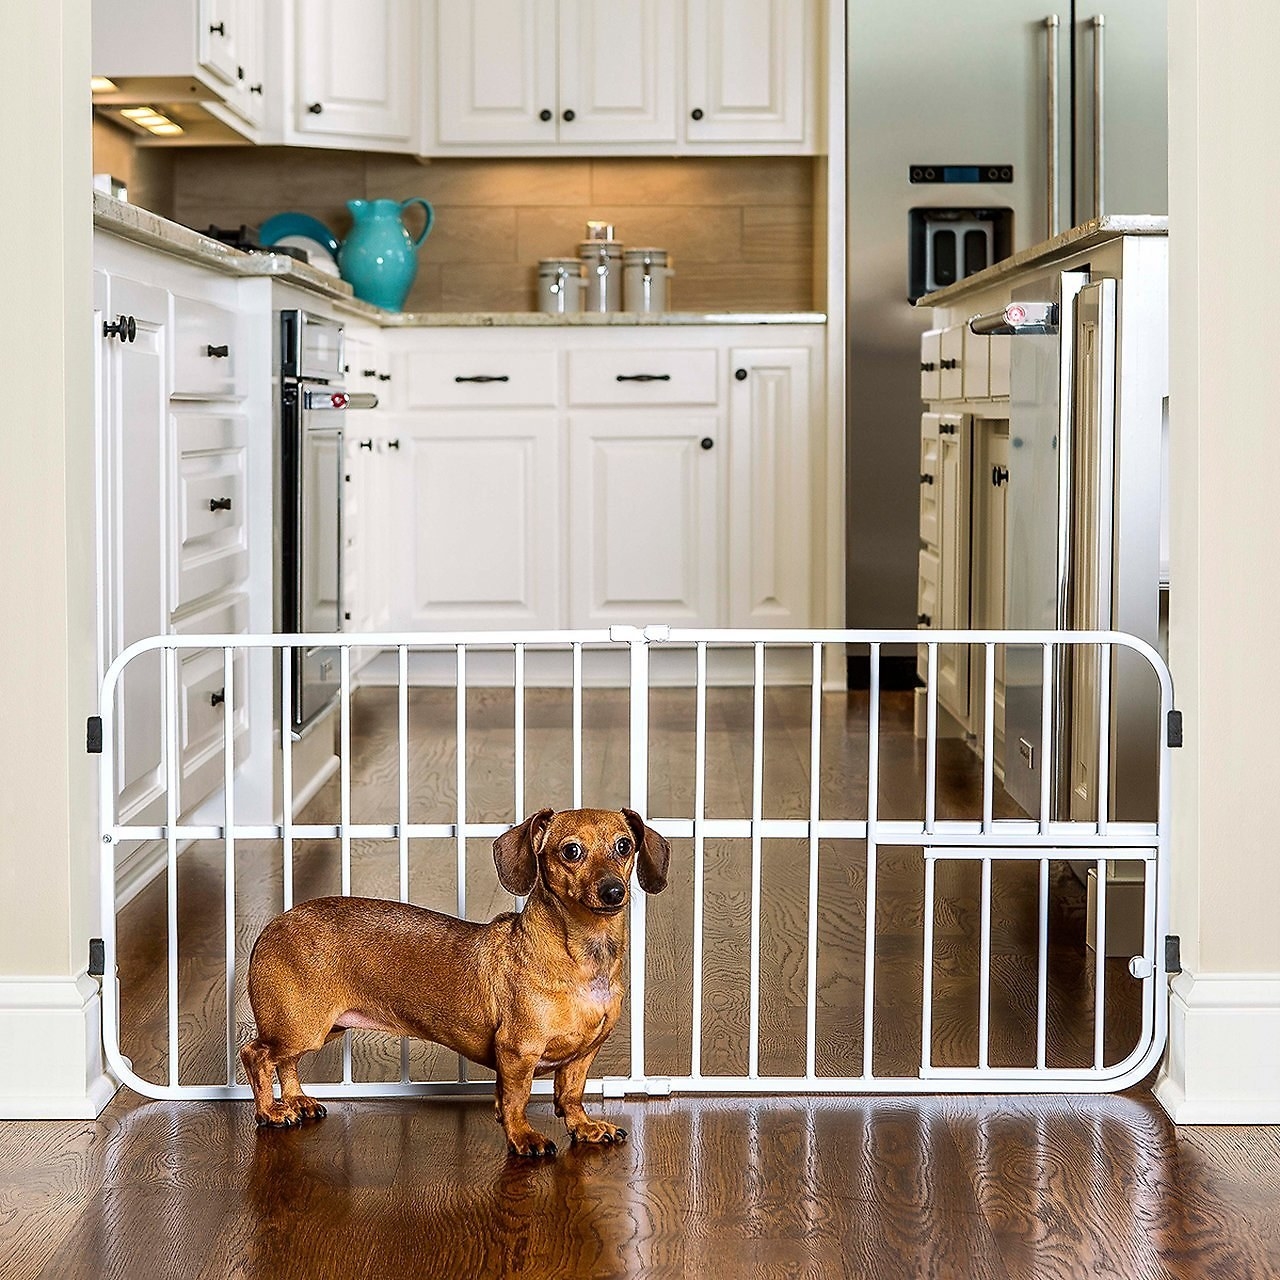 A dog standing next to the white gate, mounted between two walls